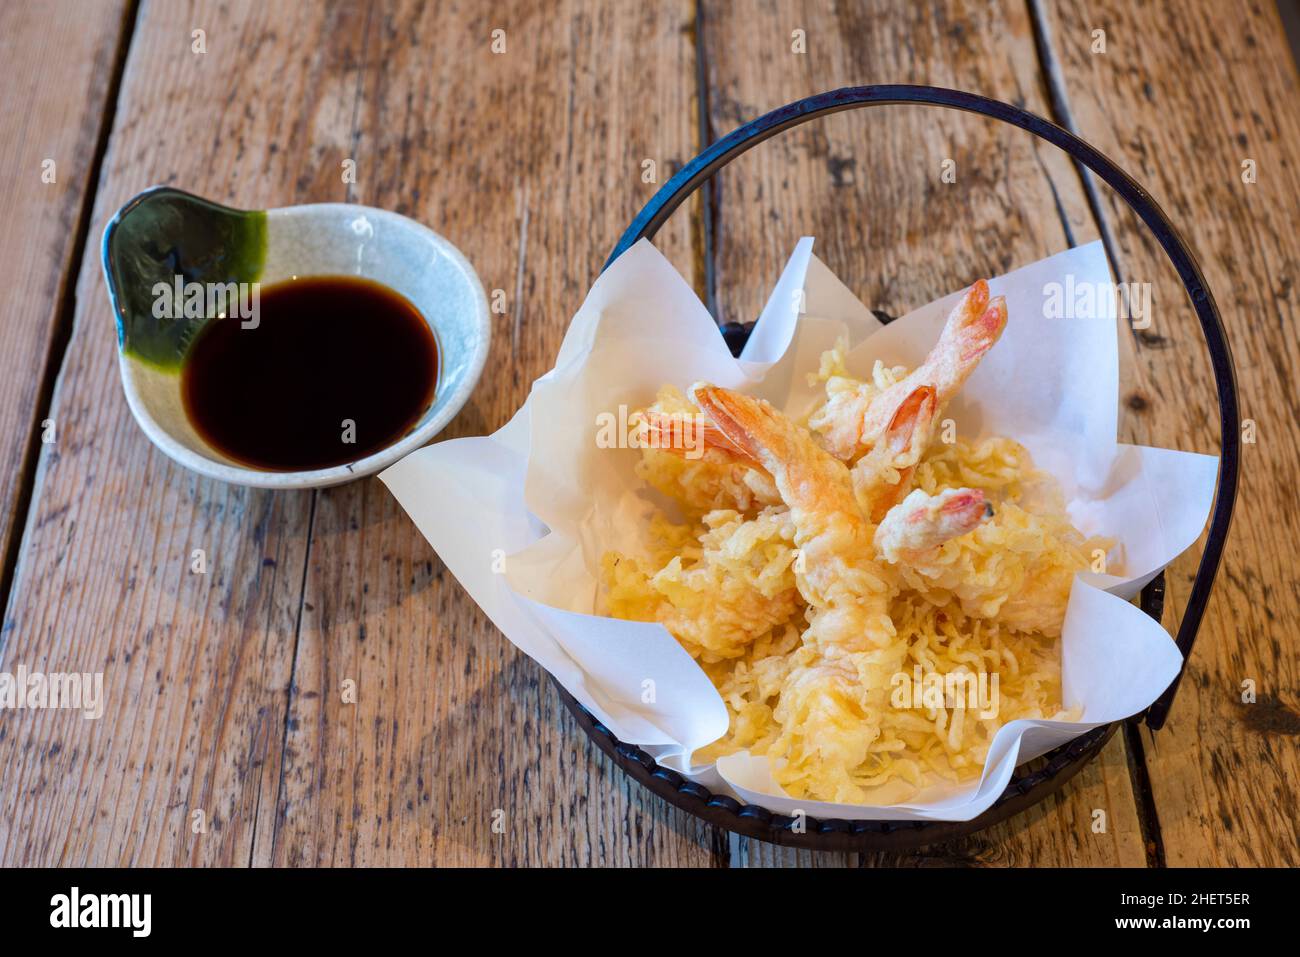 Japanese Asian cuisine : tempura battered prawns served in a basket with soy dipping sauce Stock Photo